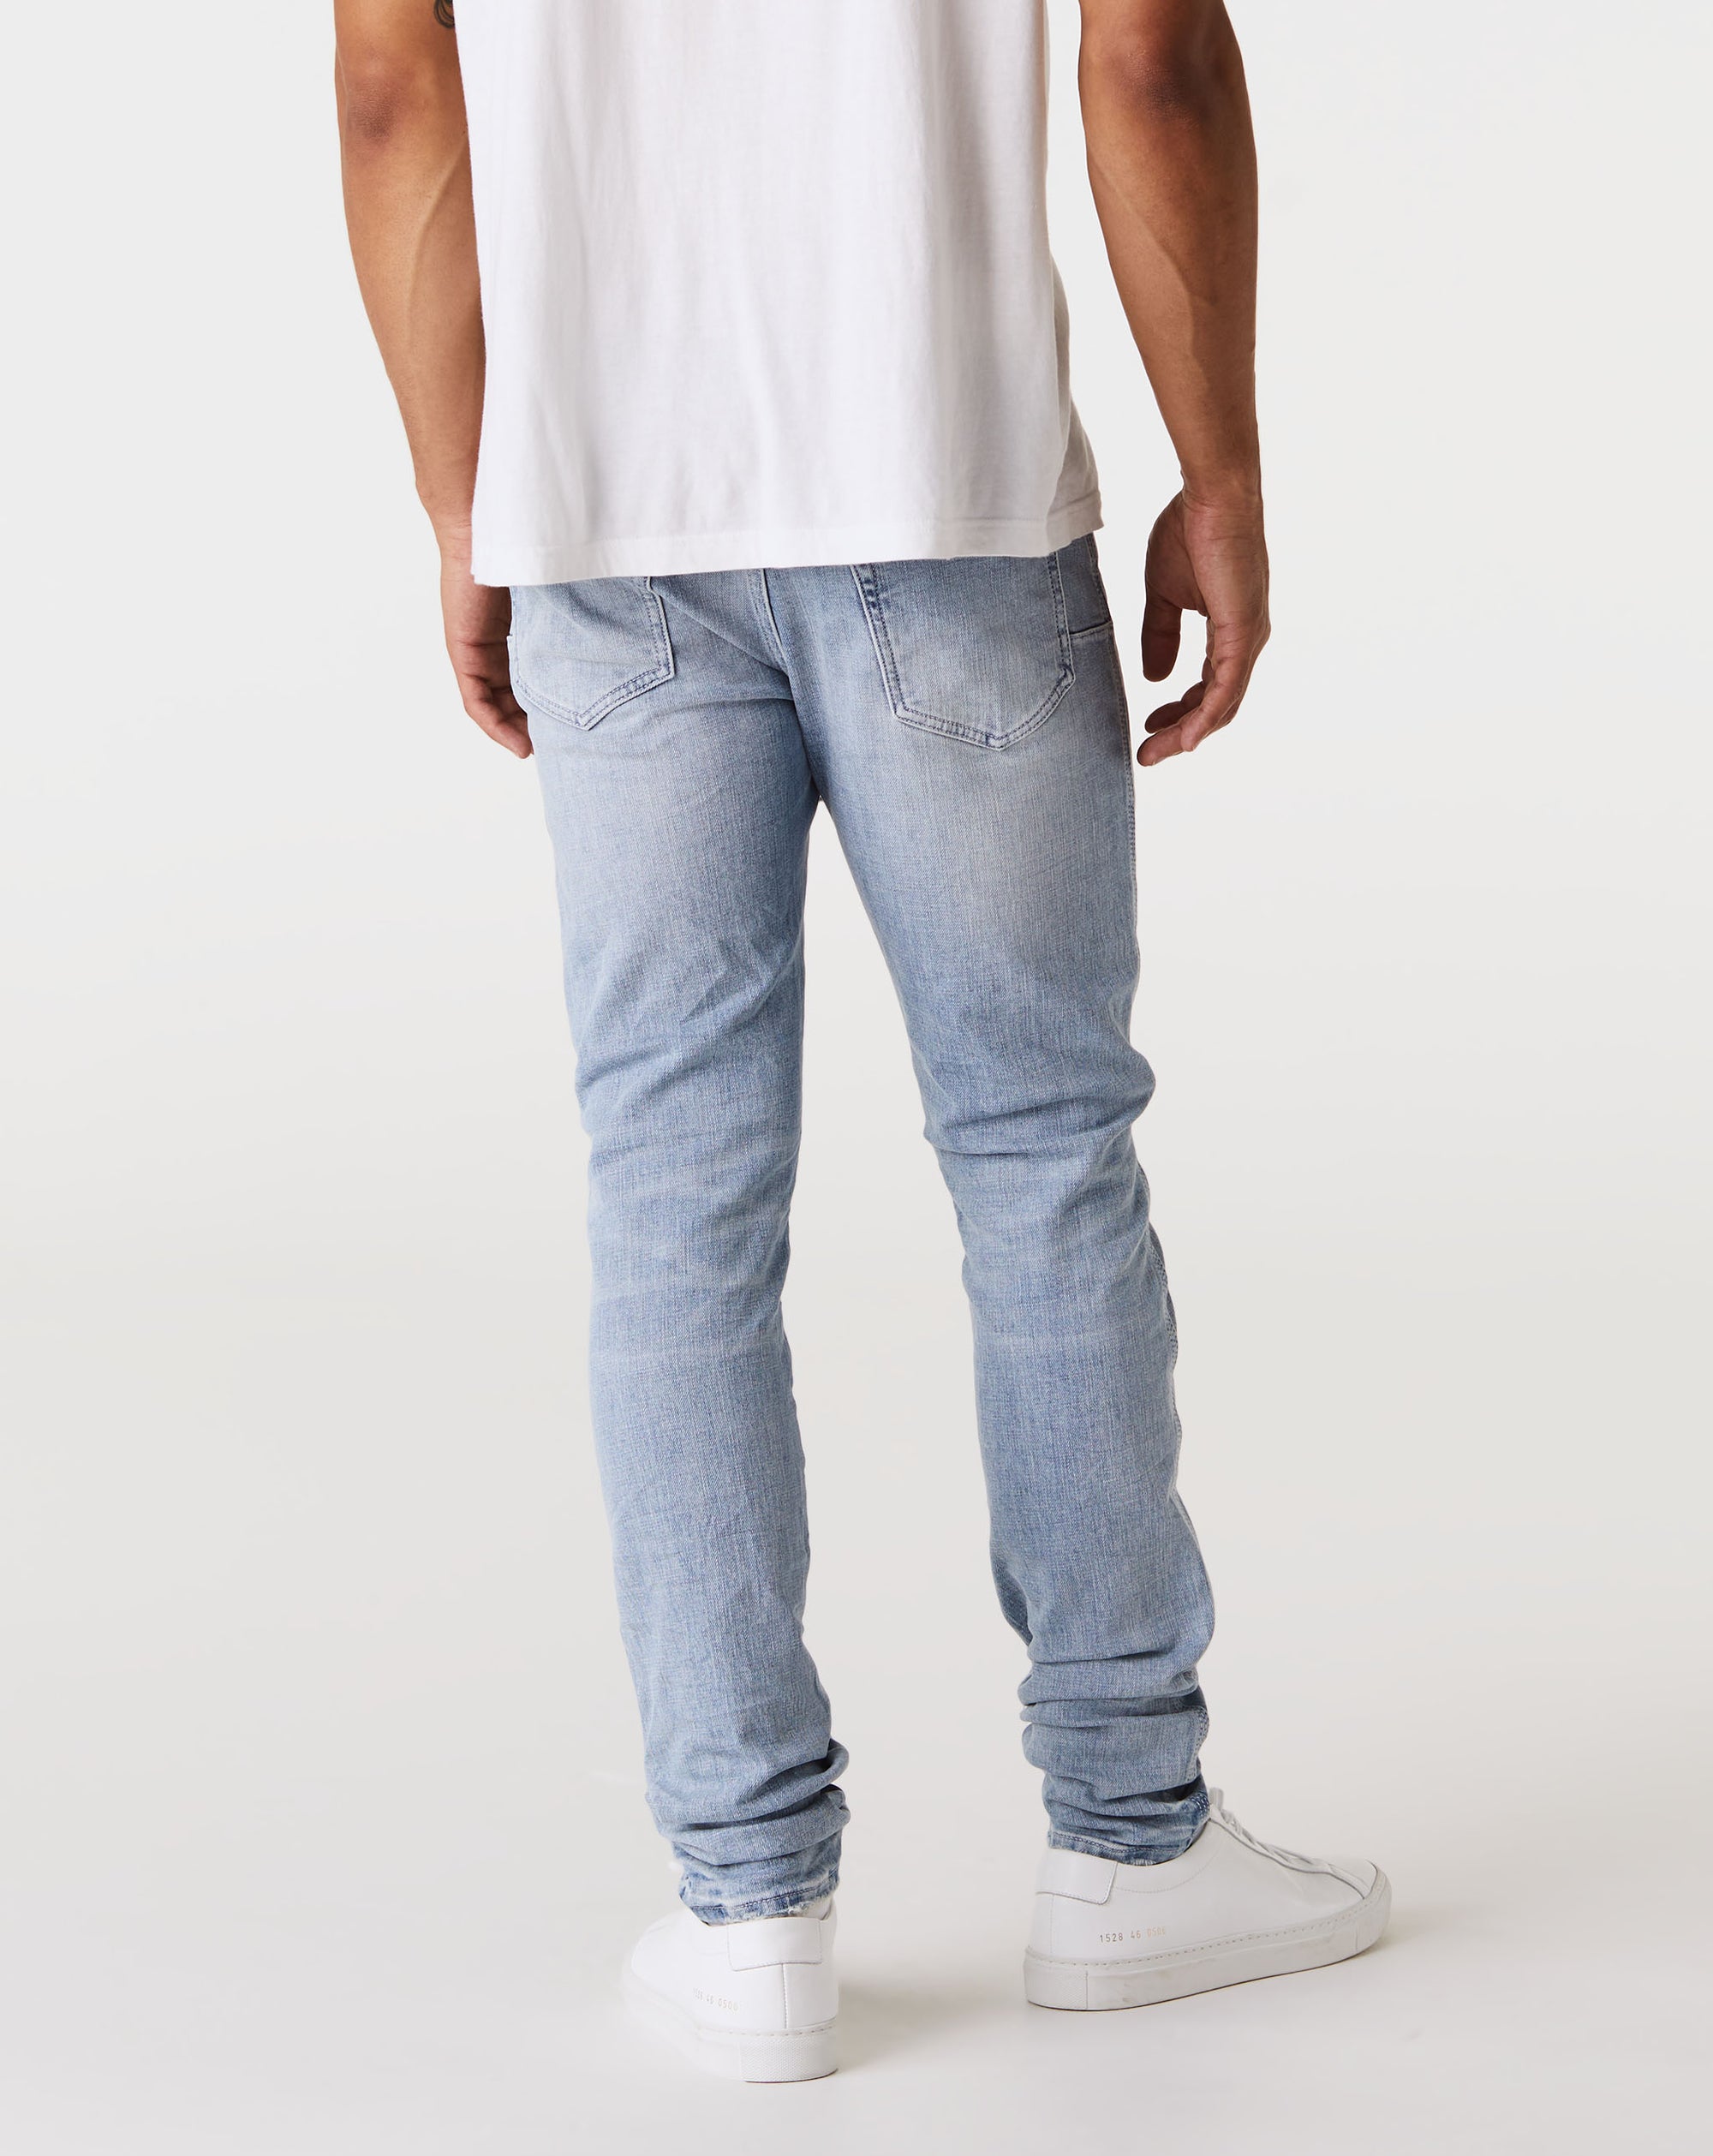 Purple Brand Low Rise Skinny Jeans - Rule of Next Apparel